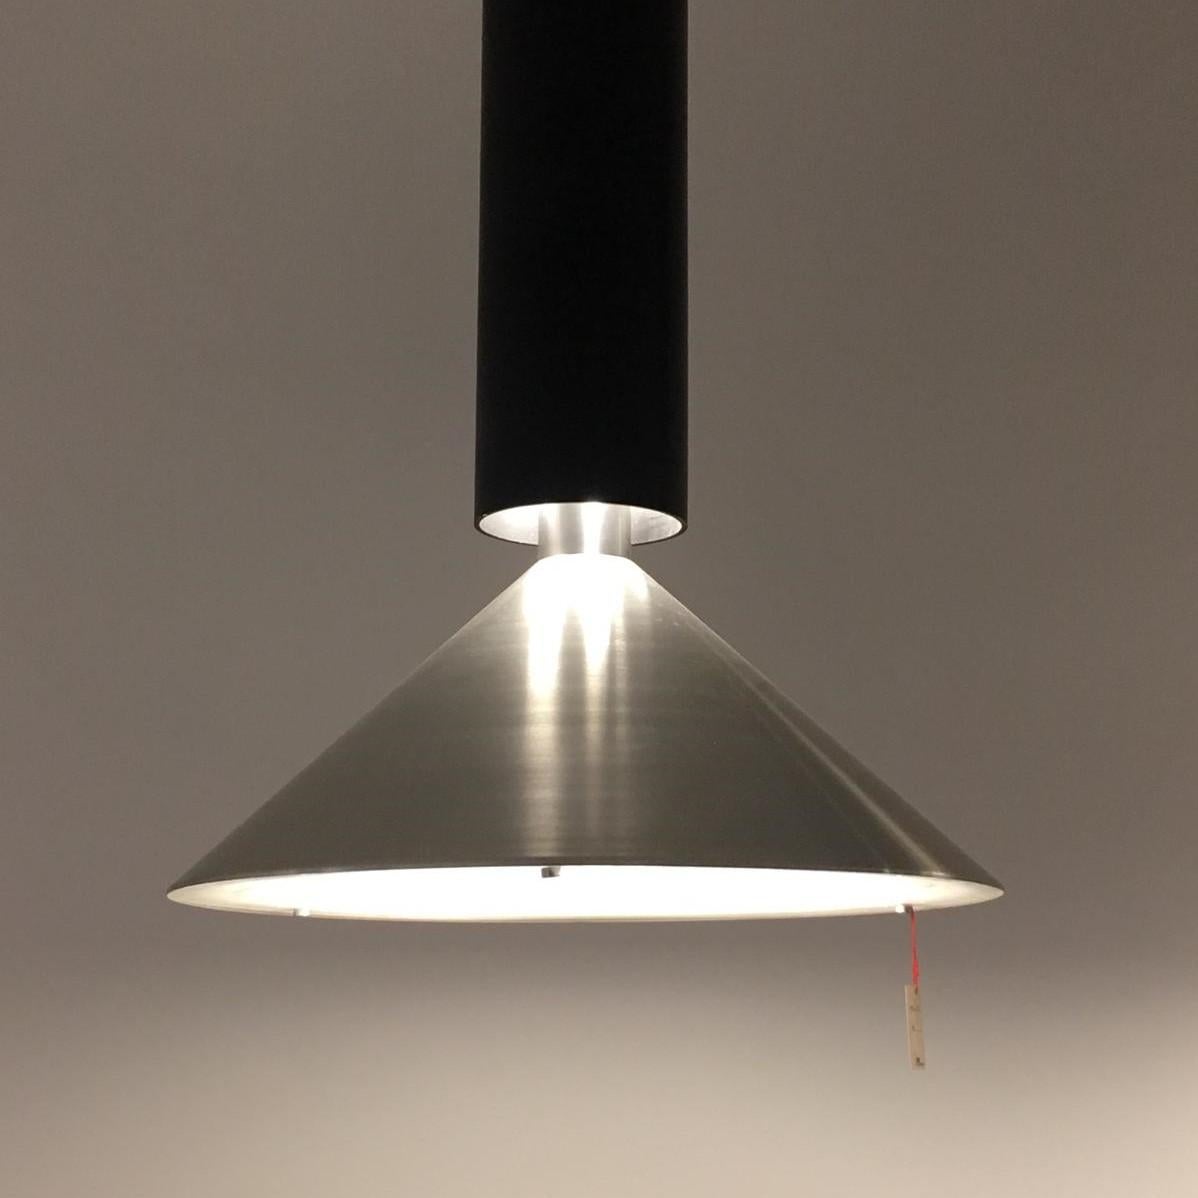 Metal Angelo Brotto “Gaspare” Hanging Lamp for Esperia, Italy, 1970 For Sale